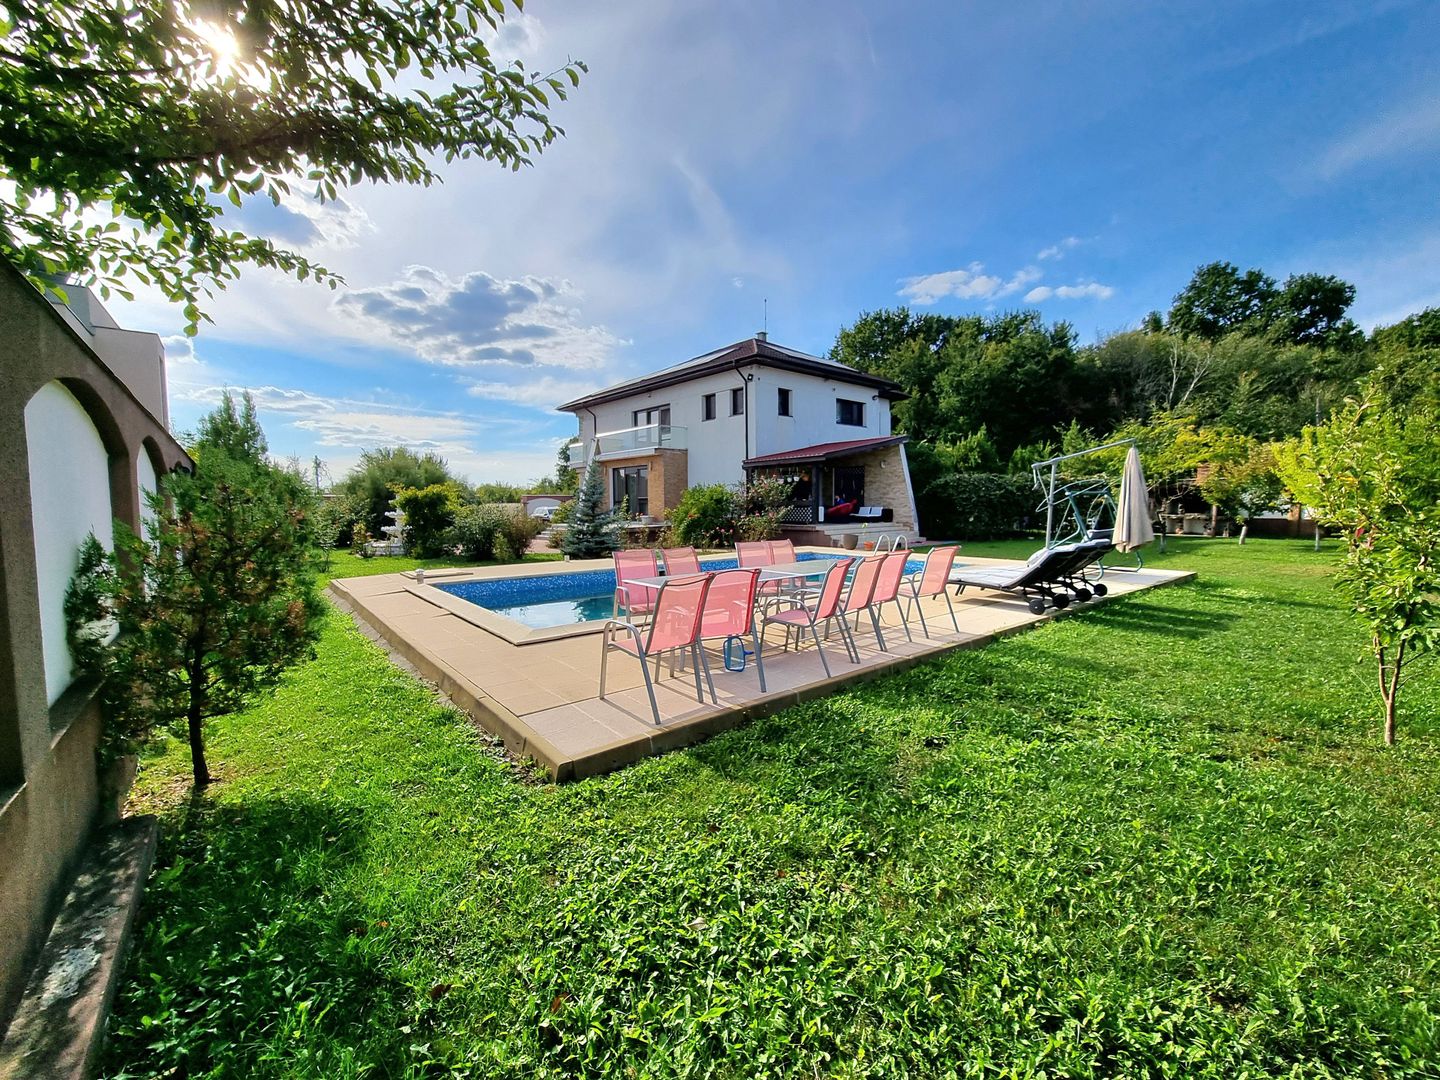 Detached house with swimming pool located in the Sisesti - Baneasa area, 1,950 square meters of land